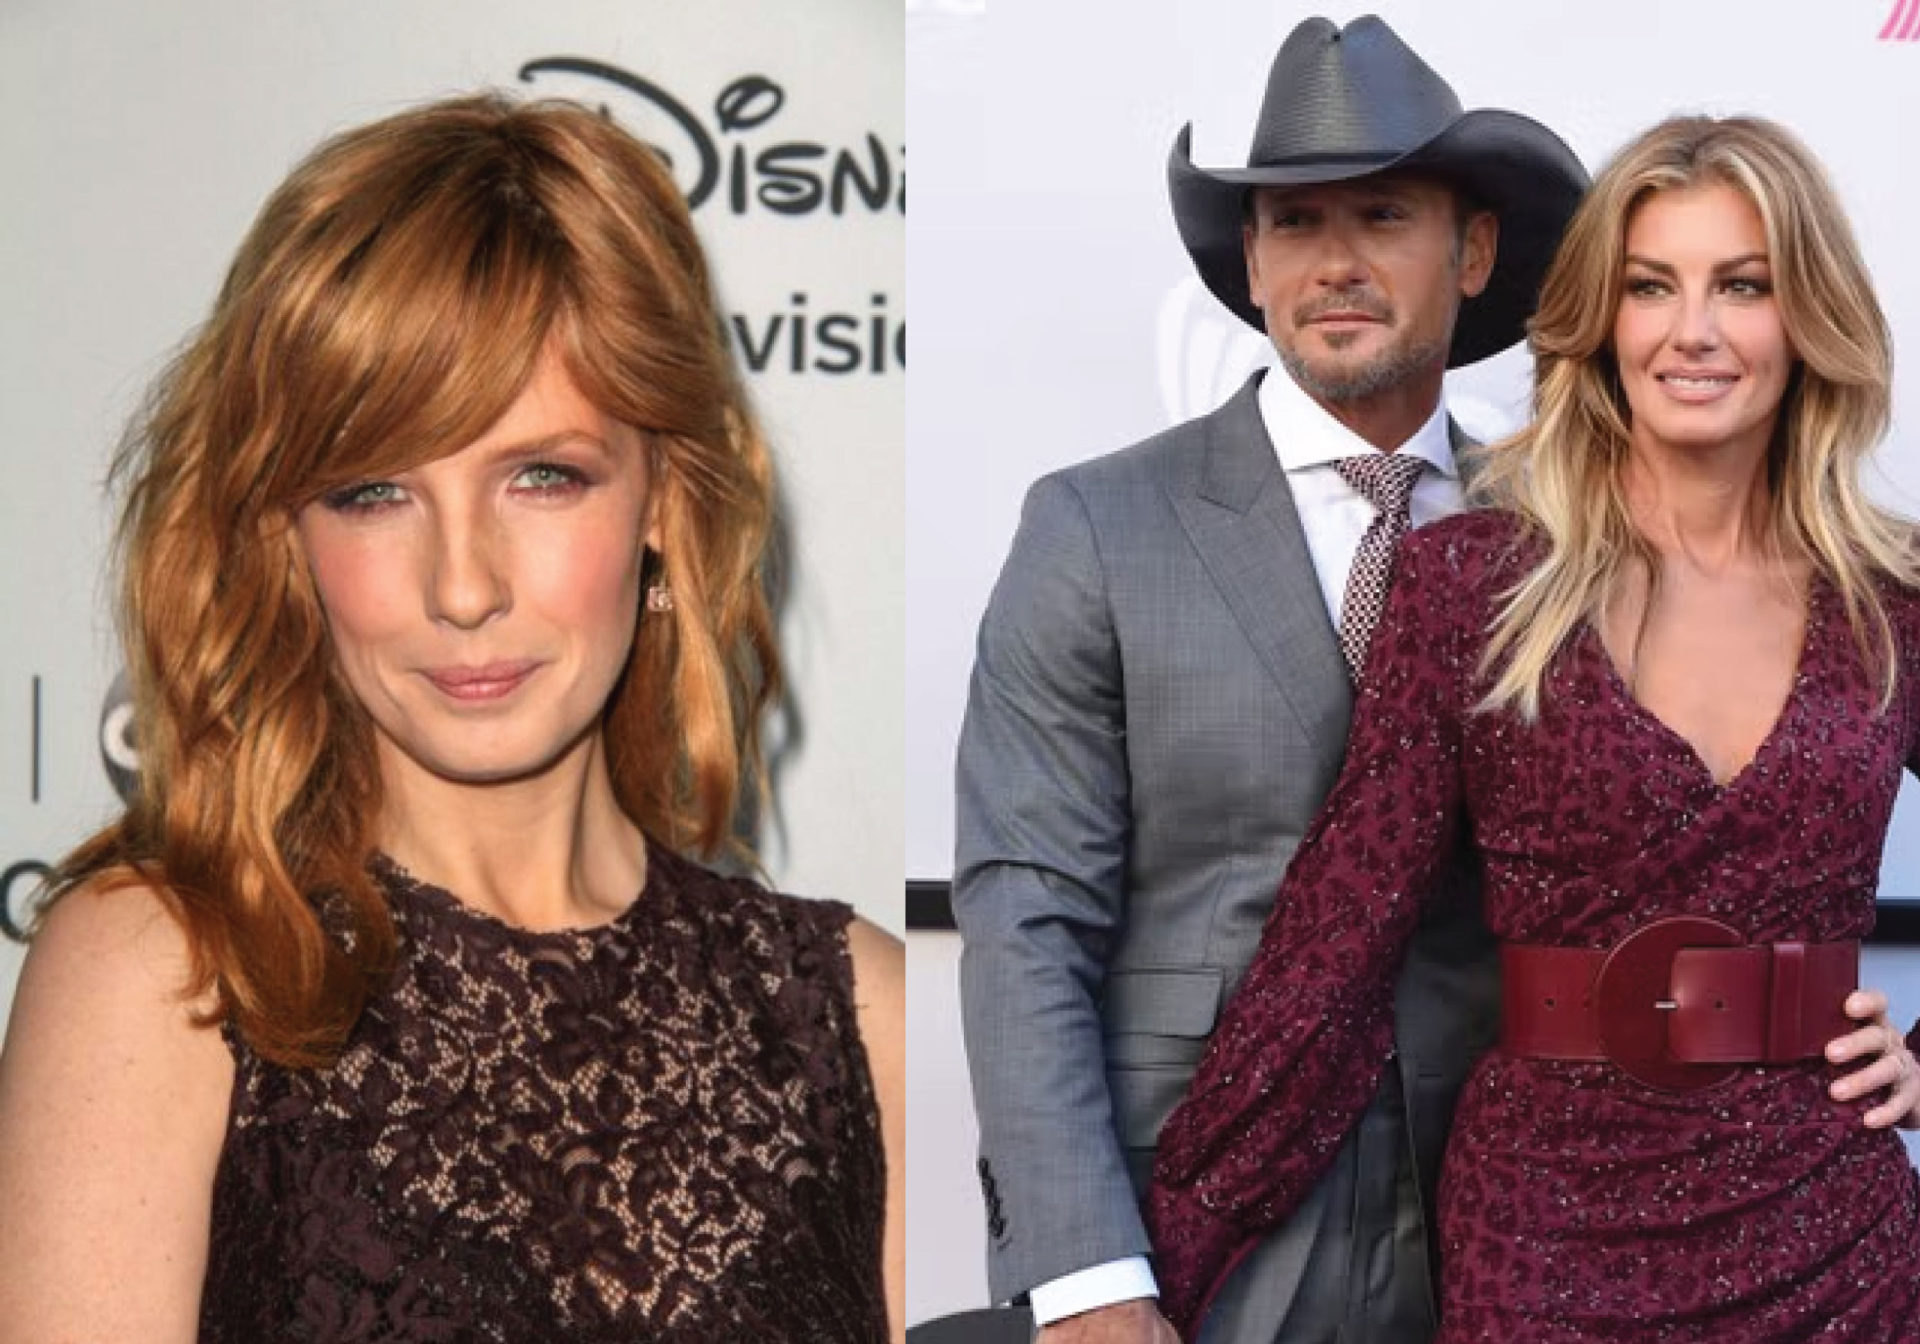 Kelly Reilly: A Versatile Actress and Critical Success in "Yellowstone"